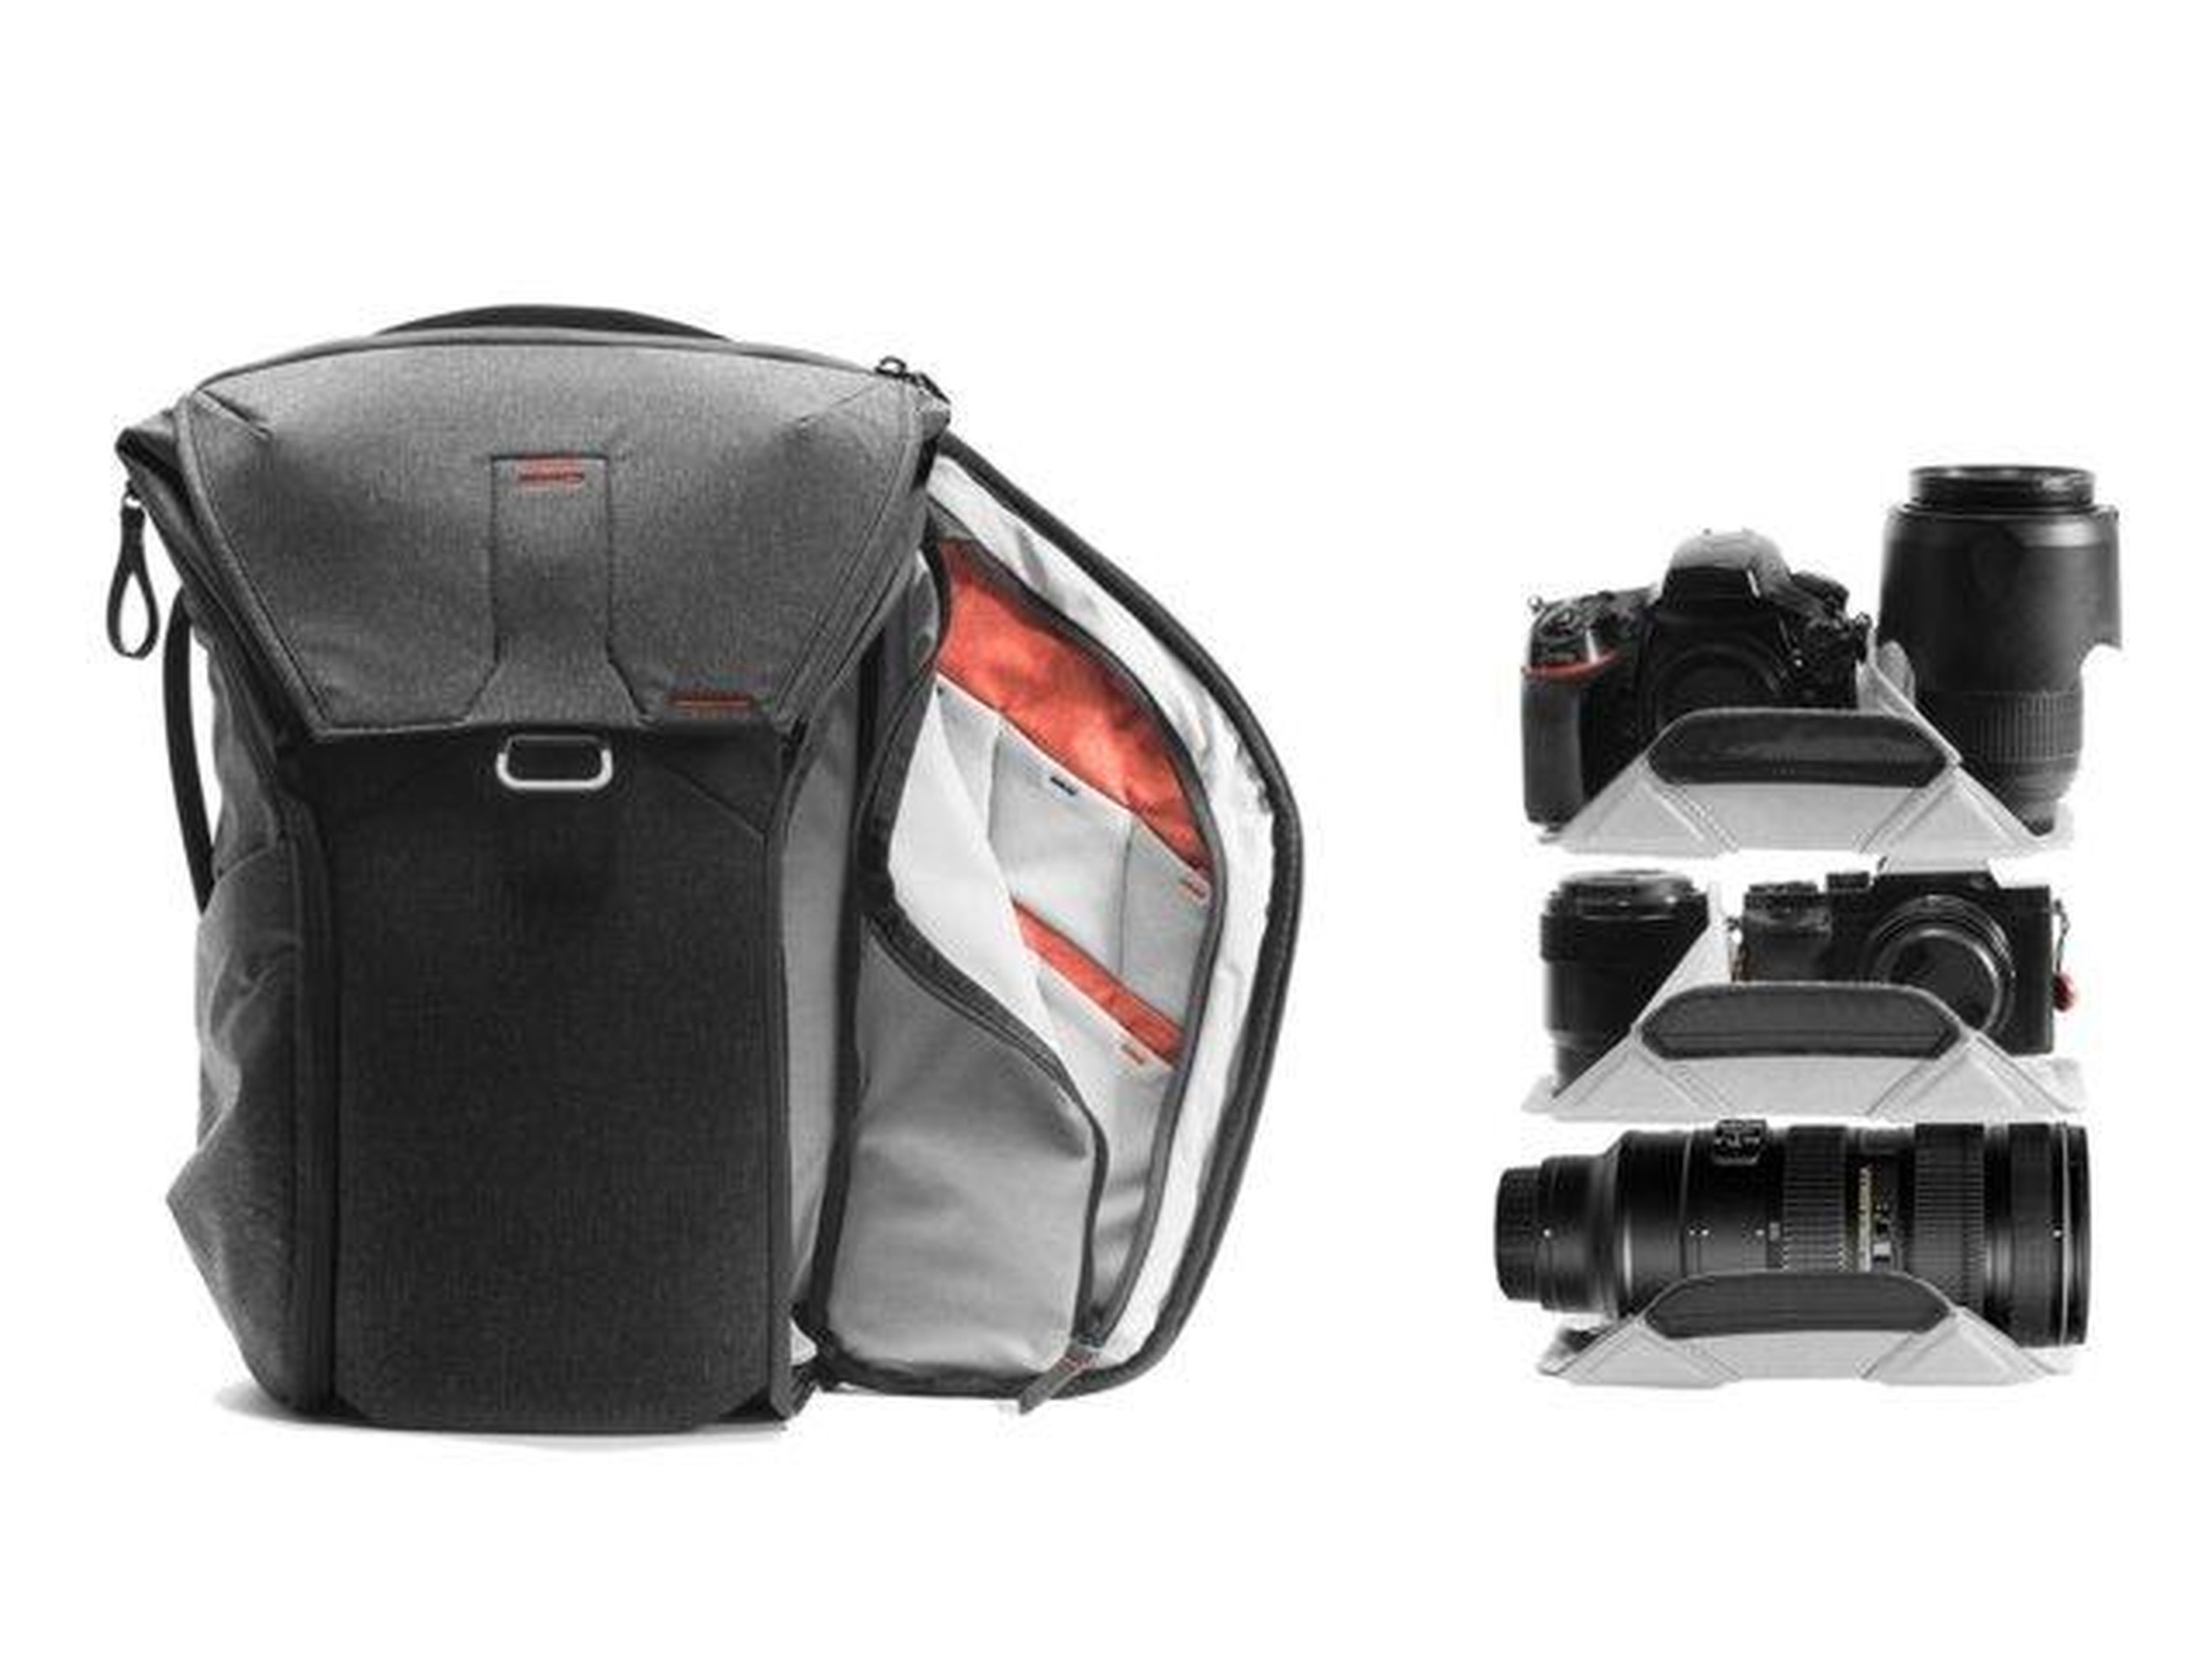 The best camera bag you can buy